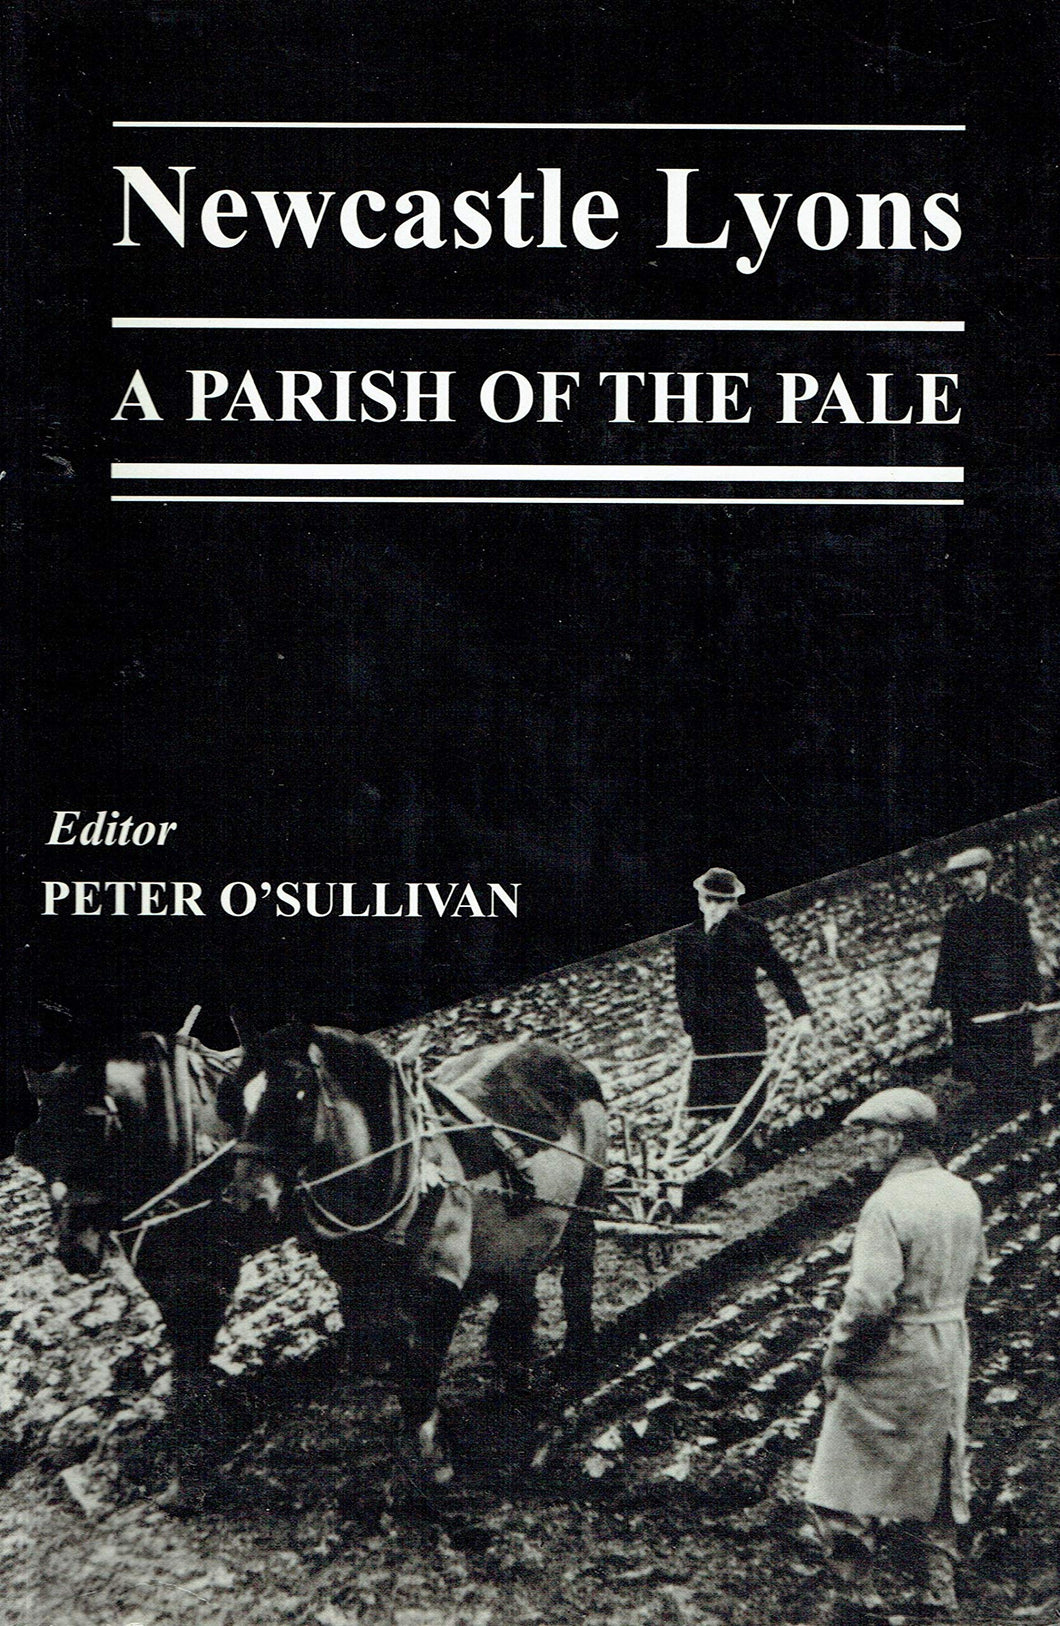 Newcastle Lyons: A Parish of the Pale